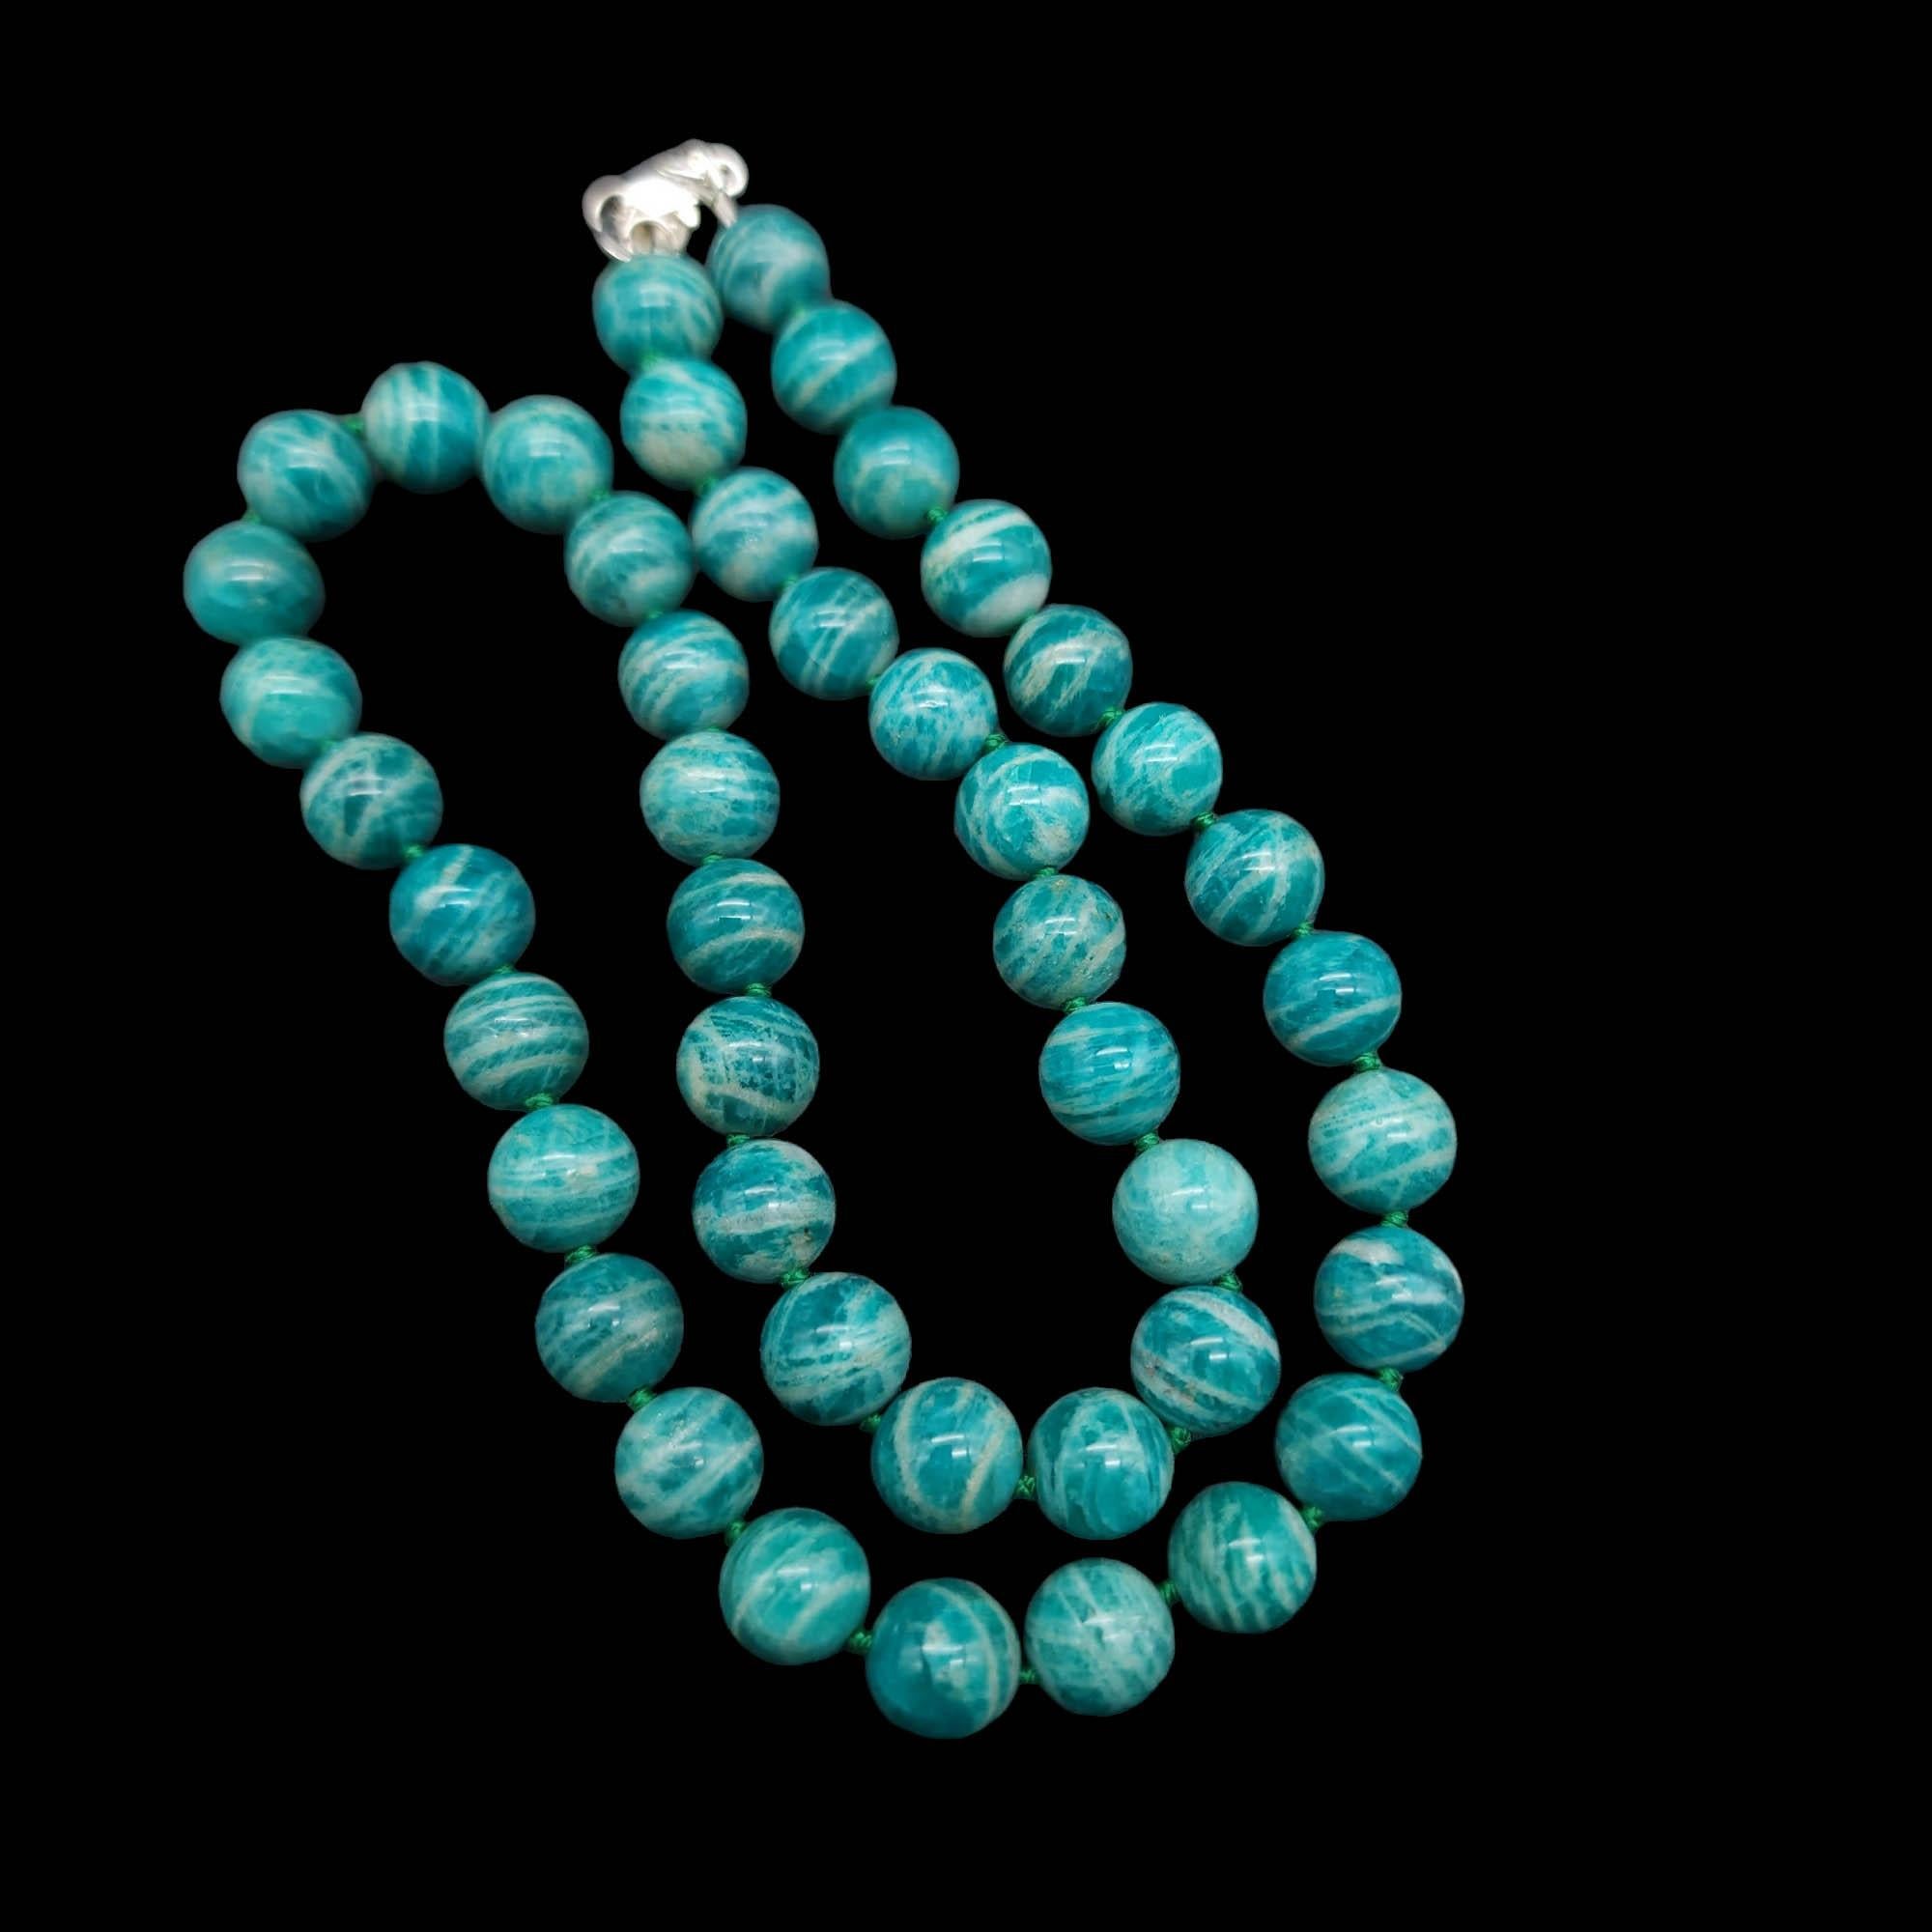 Retro Green Russian Amazonite Bead Knotted Necklace w Sterling Silver Clasp, Vintage For Sale